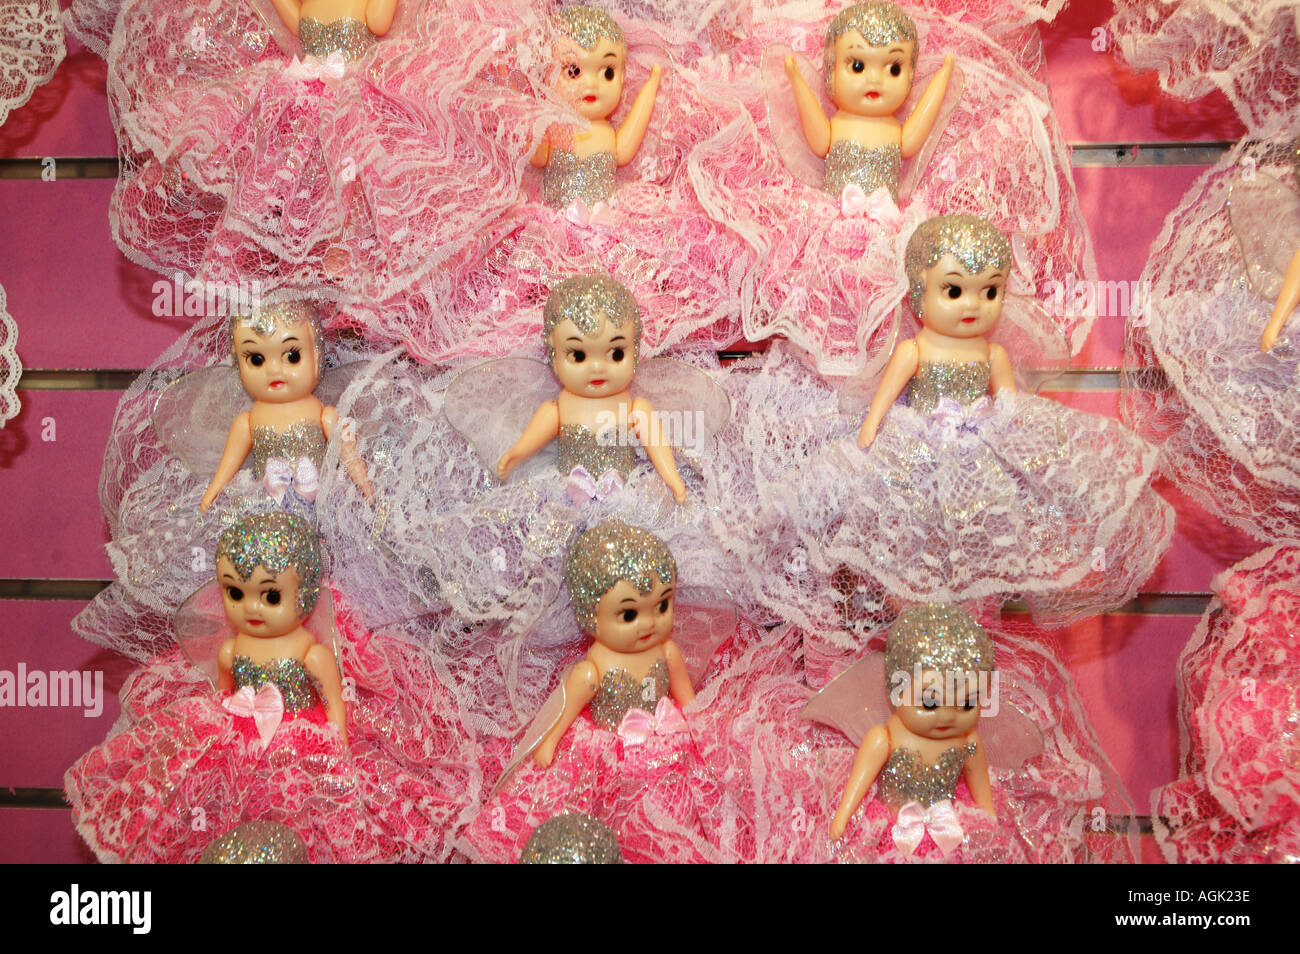 Kewpie dolls set up as prizes at agricultural show dsc 2270 Stock Photo